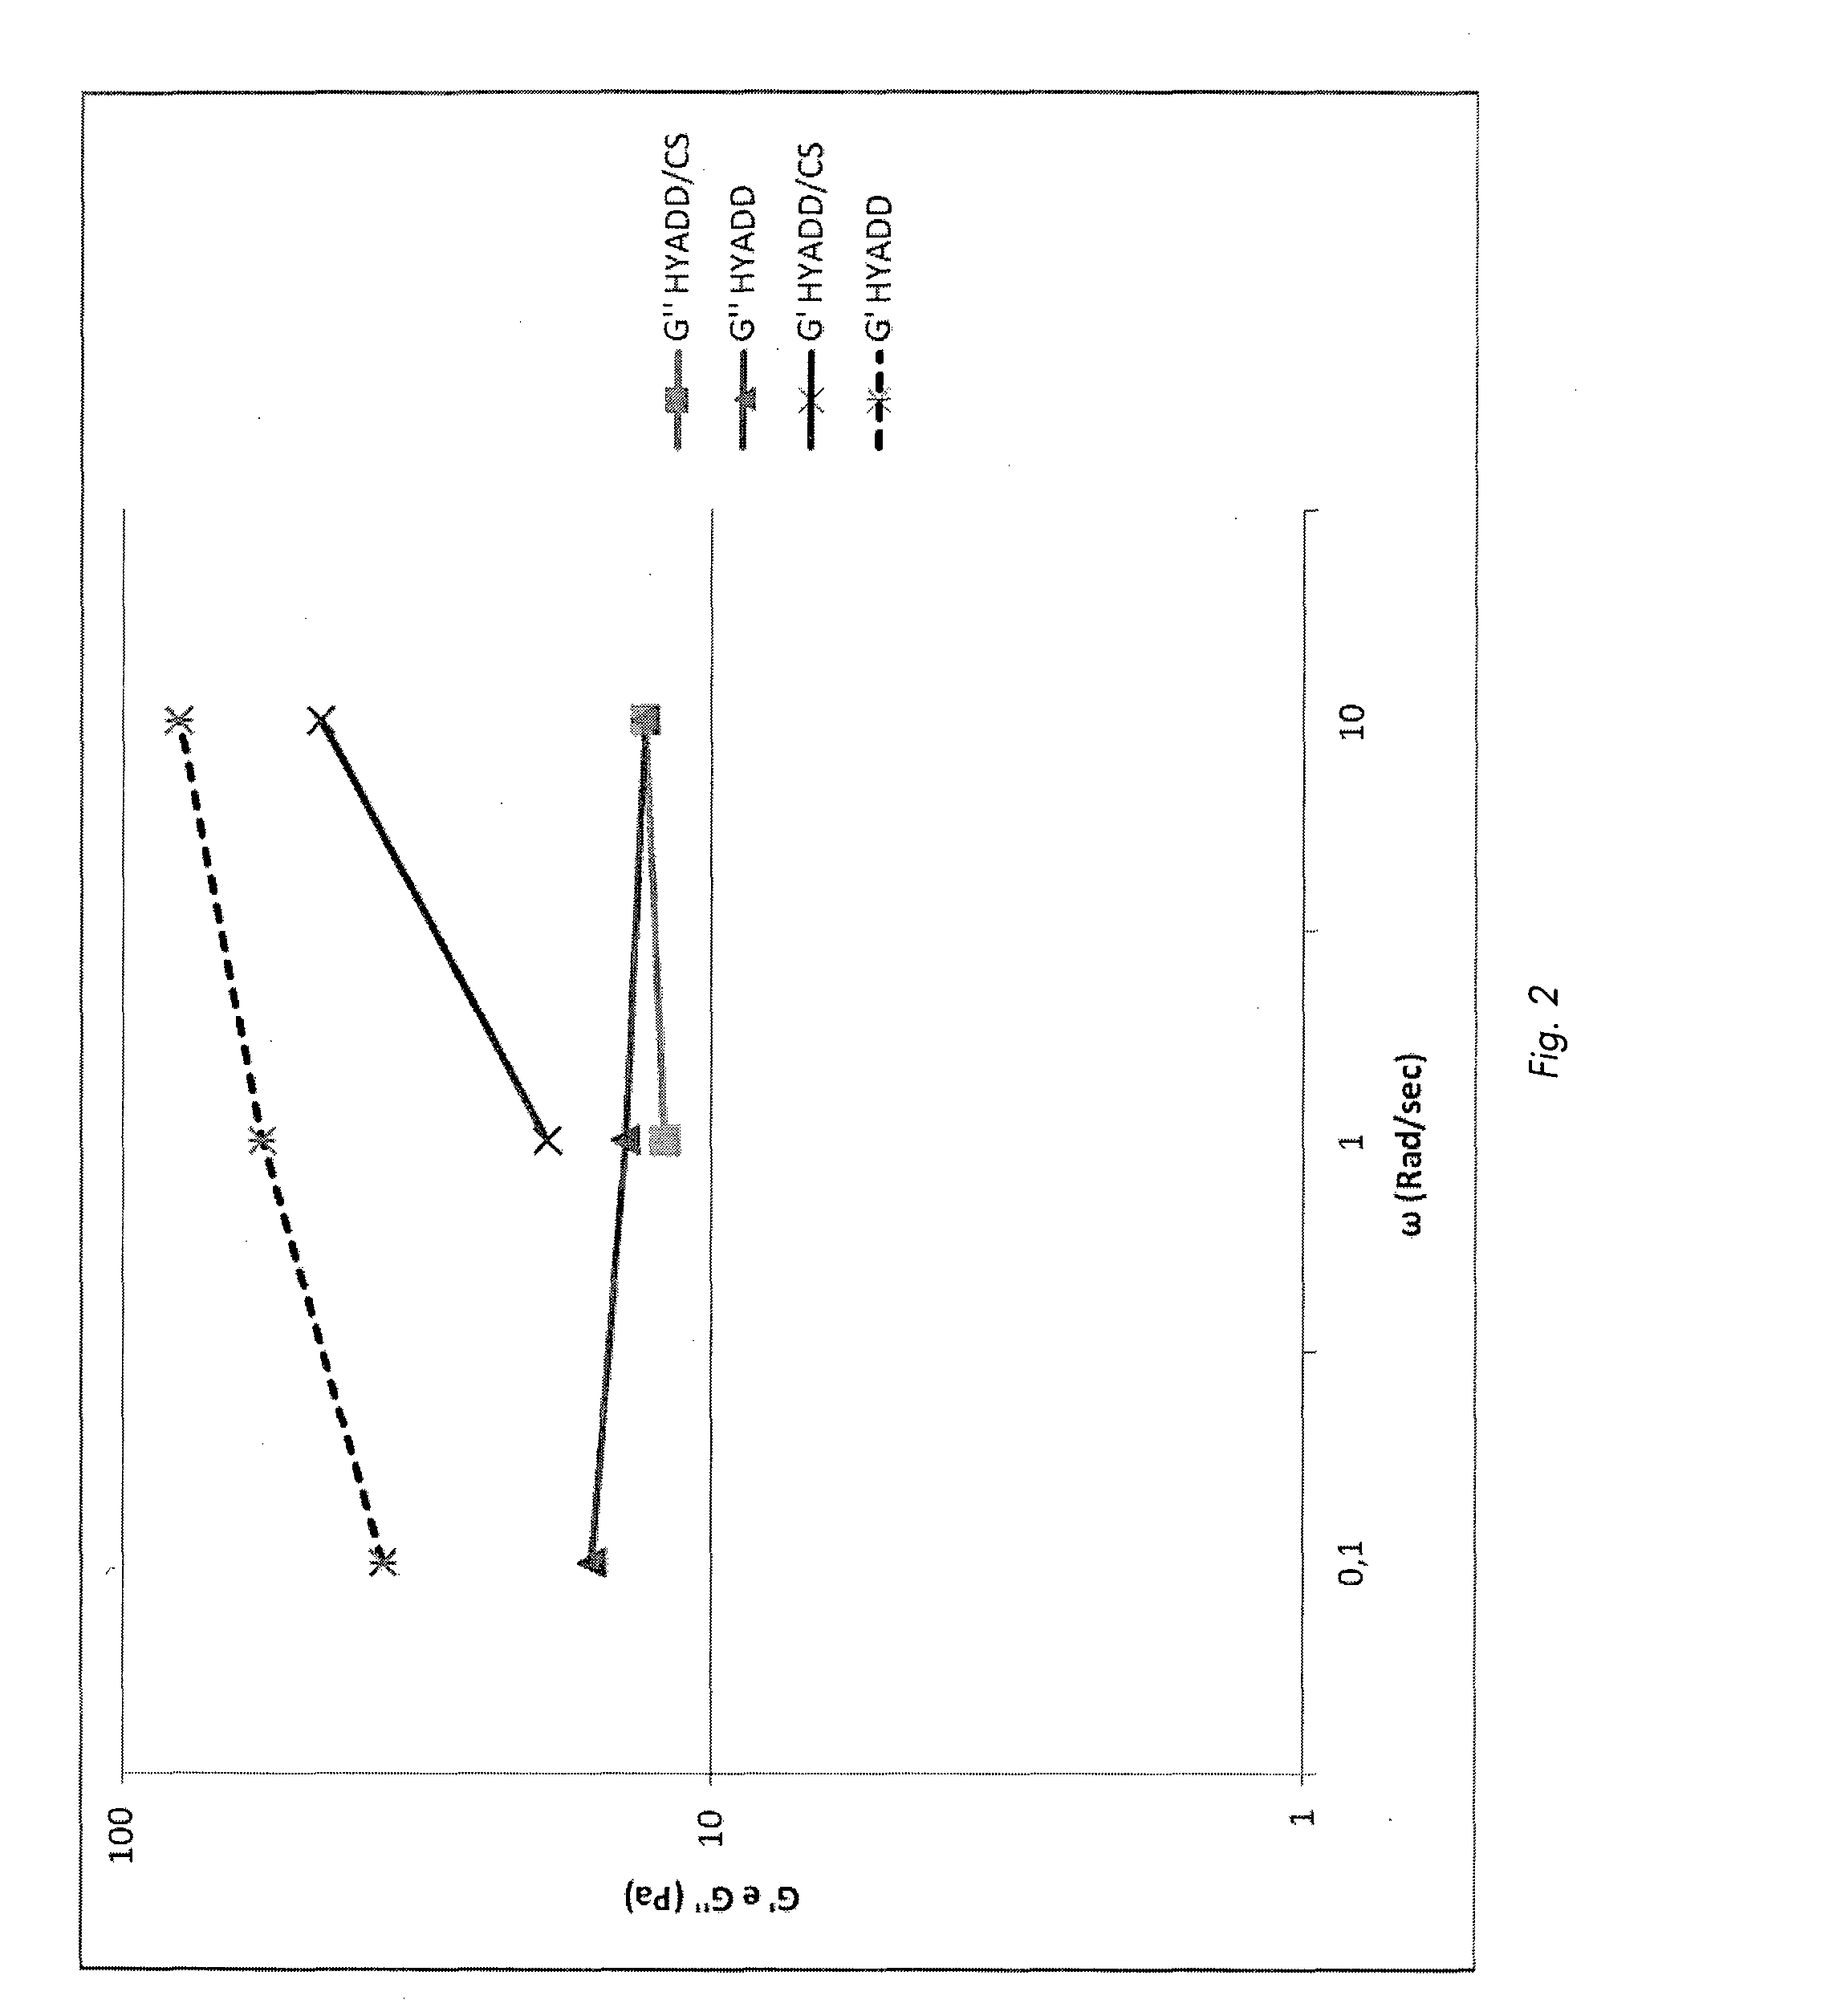 Pharmaceutical formulations comprising chondroitin sulfate and hyaluronic acid derivatives